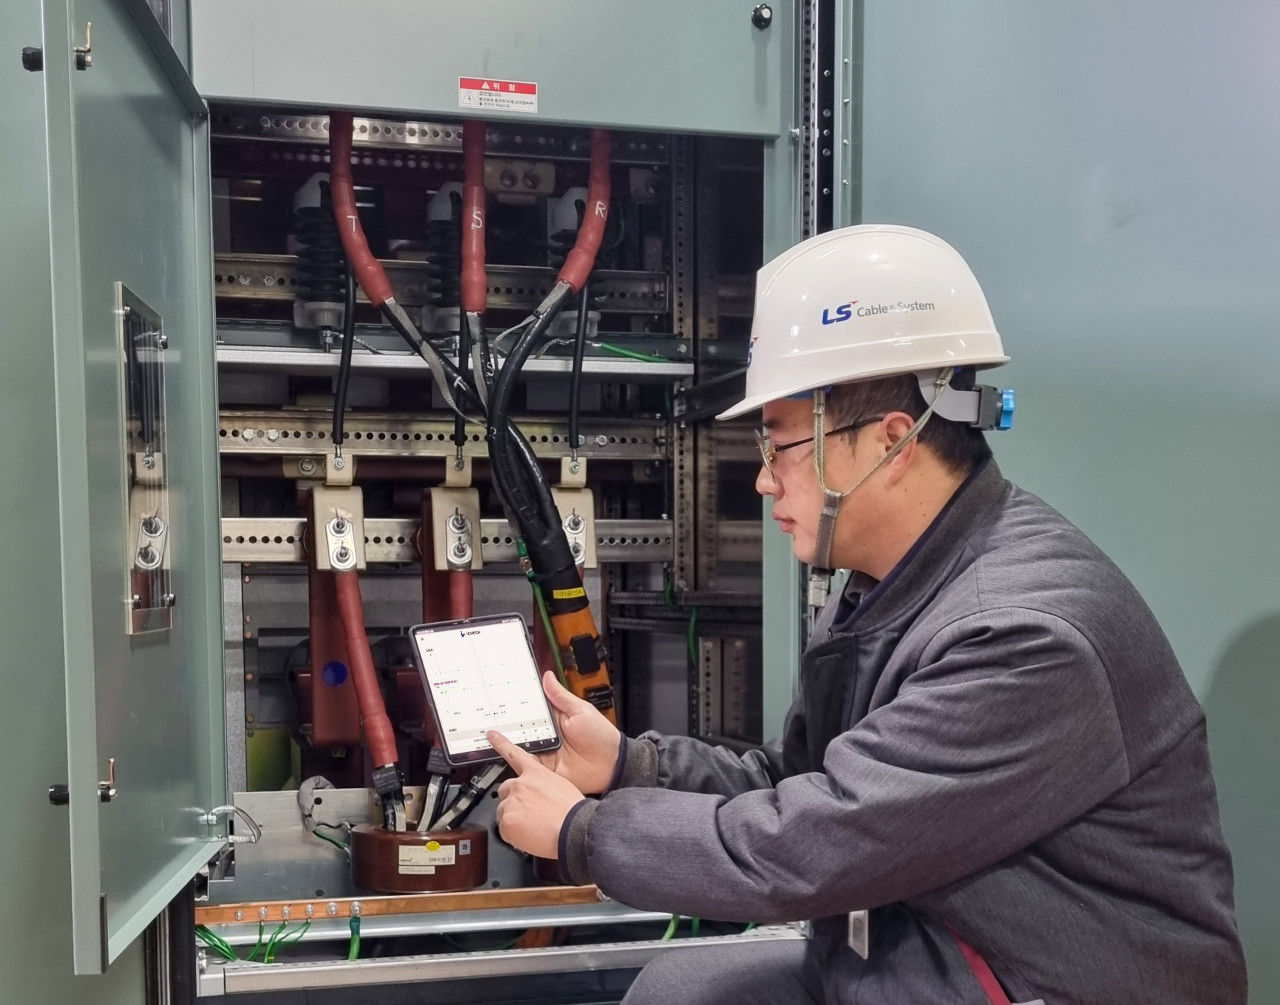 An LS Cable & System worker monitors the status of power distribution cables with an i-check system installed on a mobile device. (LS Cable & System)